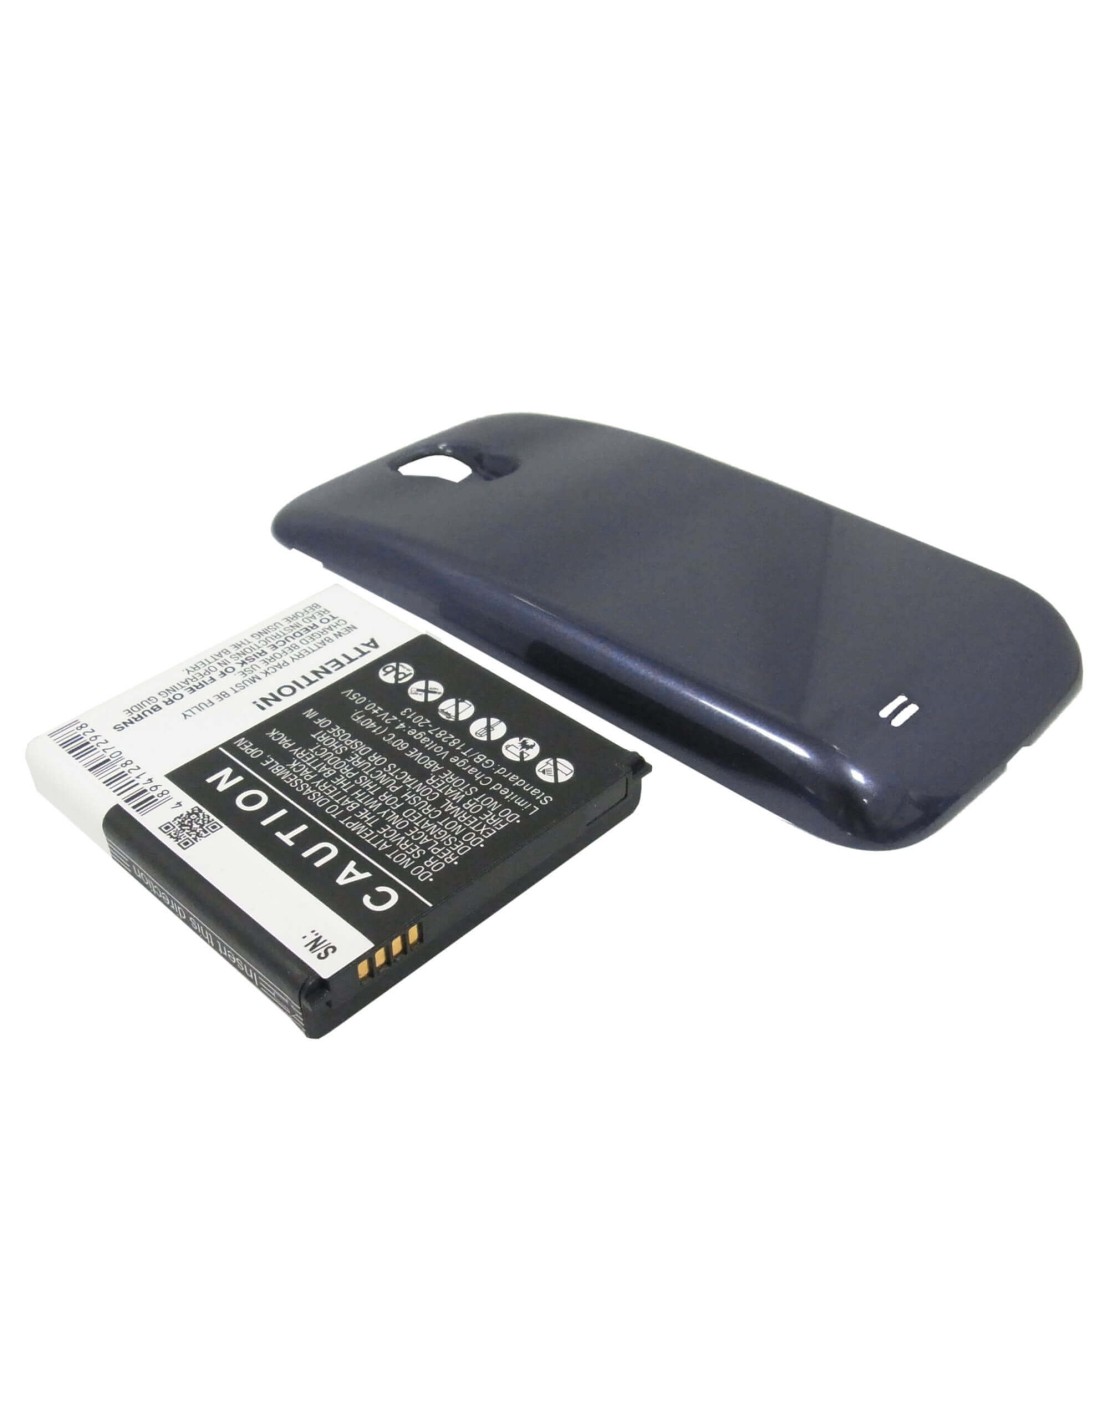 Battery for Samsung Galaxy S4, Galaxy S4 LTE, GT-I9500 blue cover 3.7V, 5200mAh - 19.24Wh